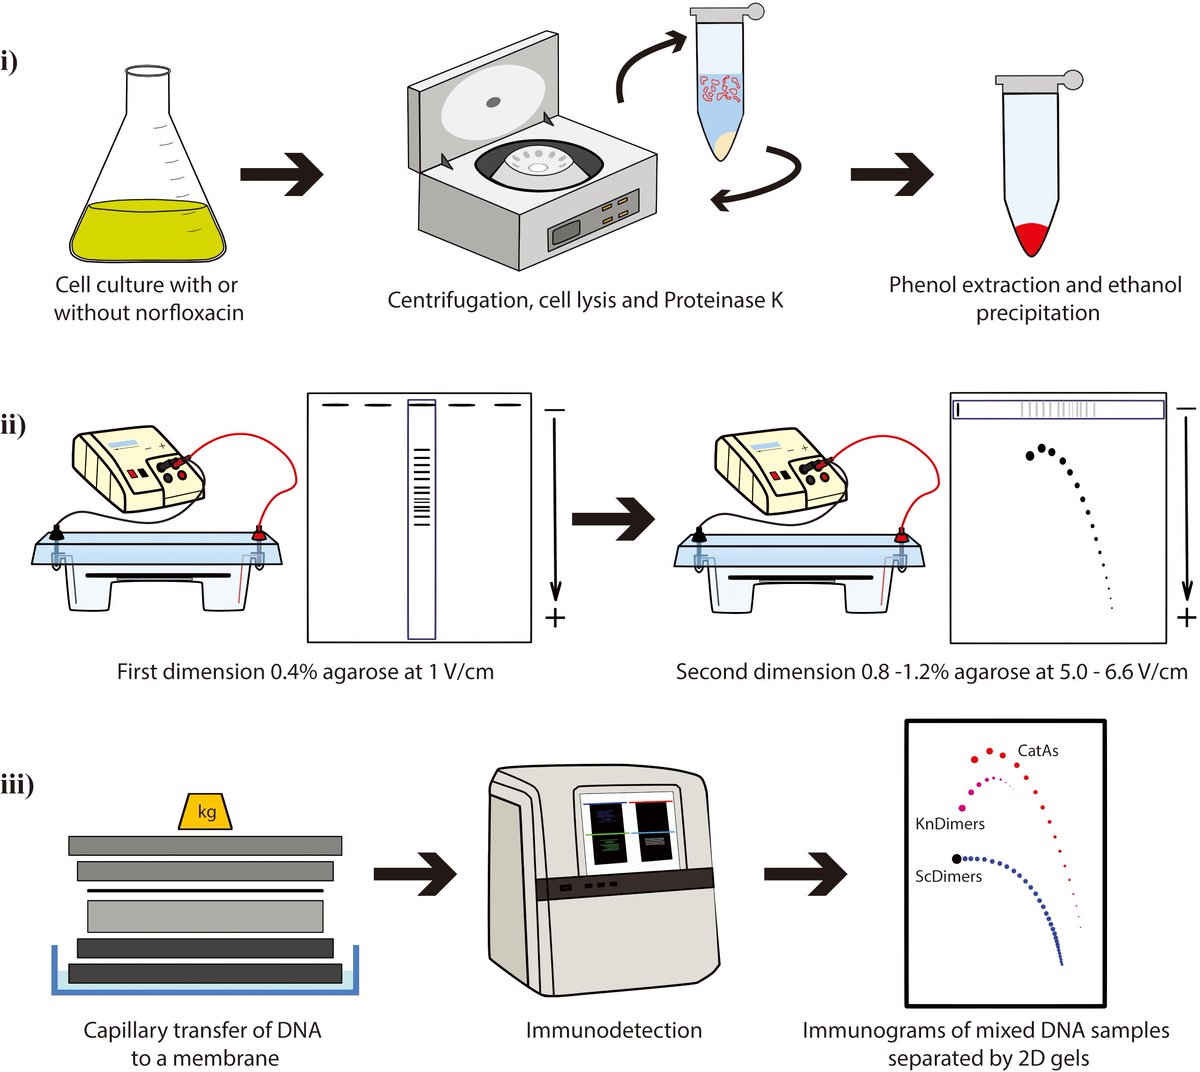 Optimization of 2D agarose gel electrophoresis for analyzing DNA topology.
bio-protocol.org/en/bpdetail?id…

🔹 The method enriches DNA samples for these topoisomers, which are later analyzed by 2D gels or microscopy. Key features include the ability to

#research #molecularbiology